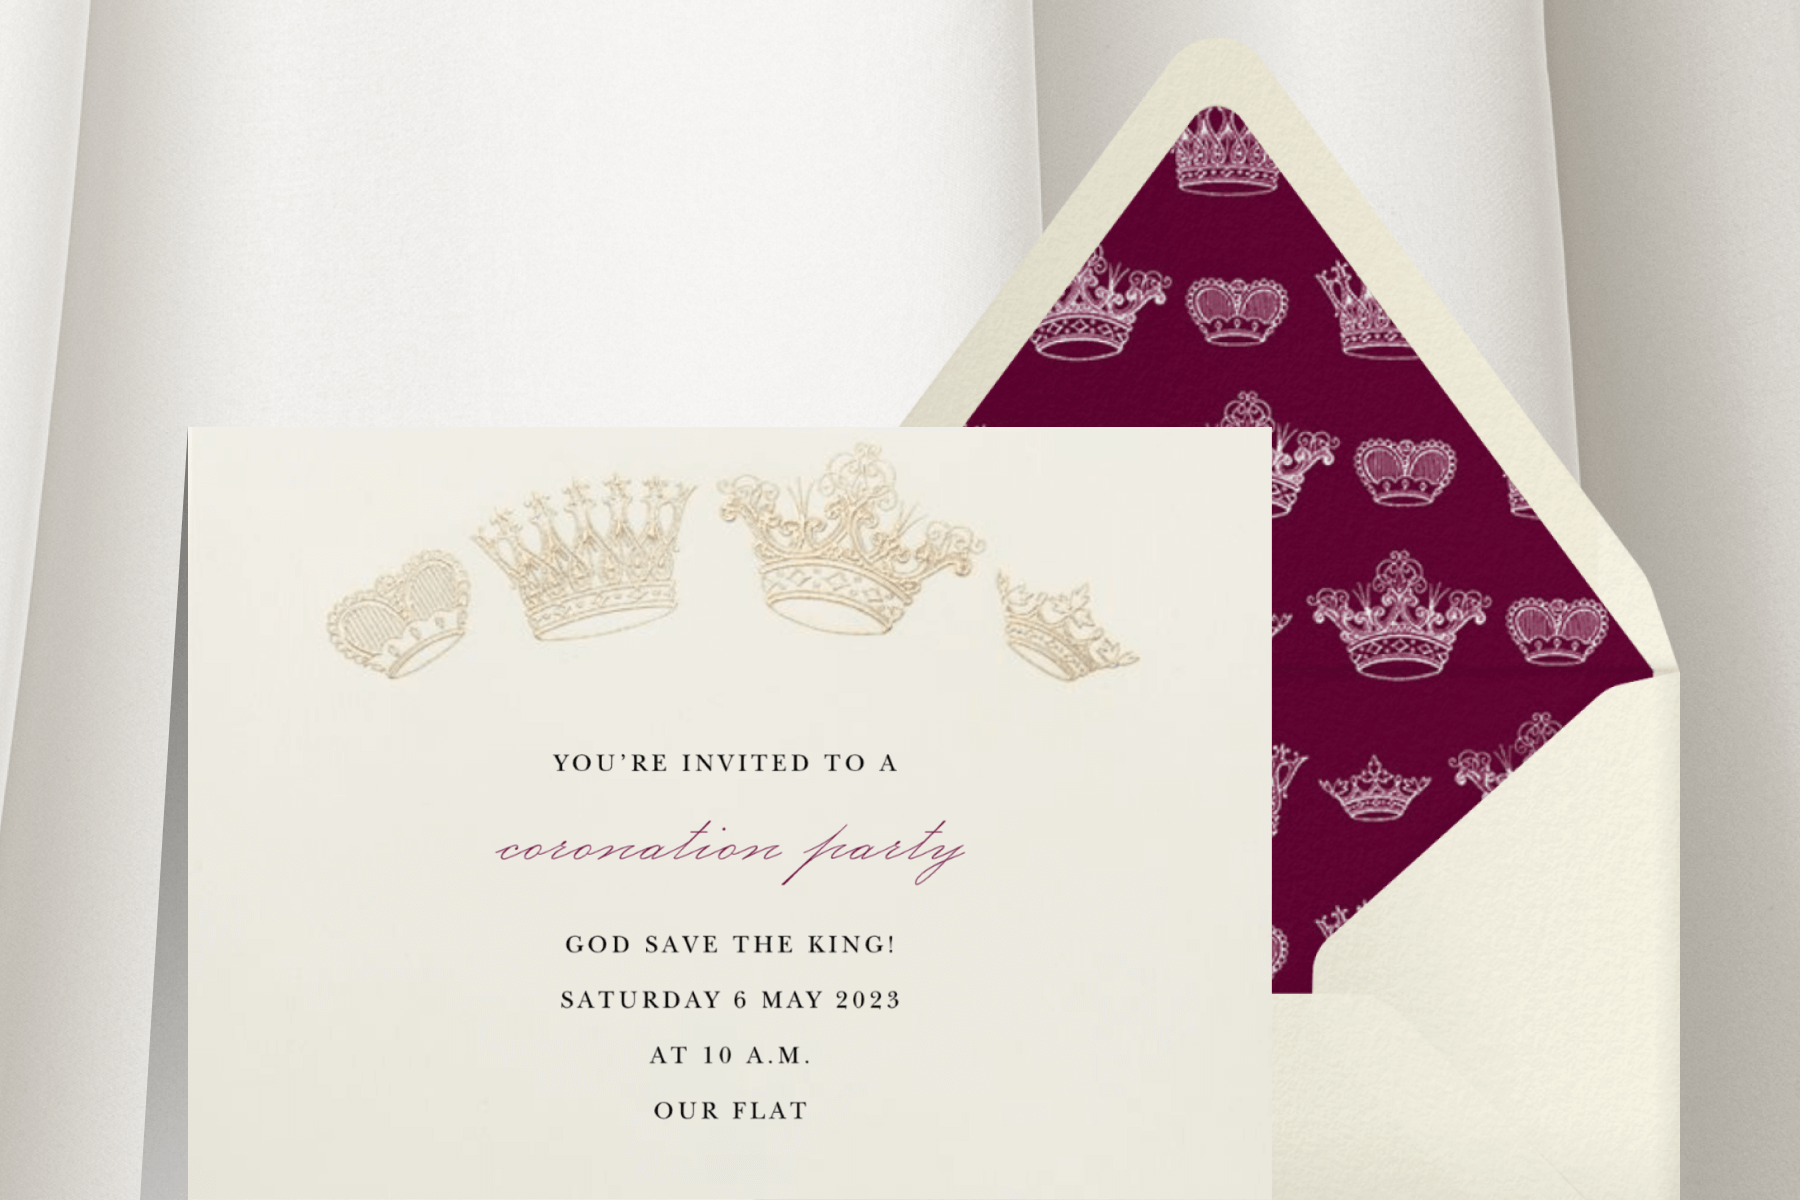 Alt text: A white invitation has four varying crowns in gold arched at the top, beside a white envelope with a maroon crown liner.